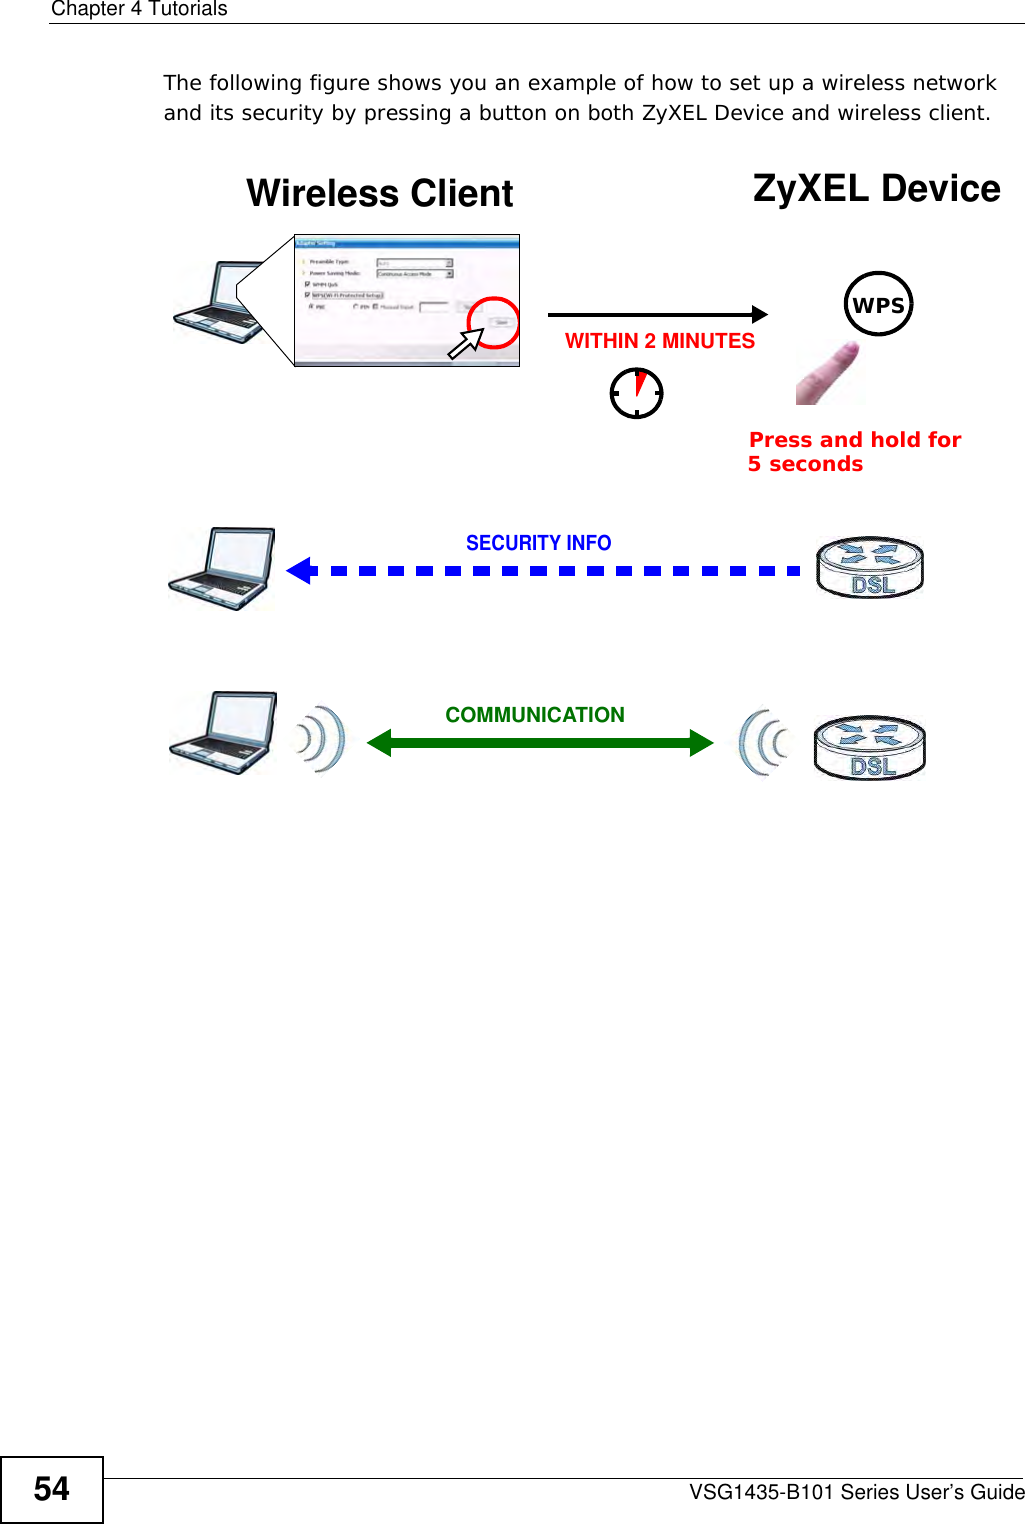 Chapter 4 TutorialsVSG1435-B101 Series User’s Guide54The following figure shows you an example of how to set up a wireless network and its security by pressing a button on both ZyXEL Device and wireless client.Example WPS Process: PBC MethodWireless Client ZyXEL DeviceSECURITY INFOCOMMUNICATIONWITHIN 2 MINUTESPress and hold for   5 secondsWPS